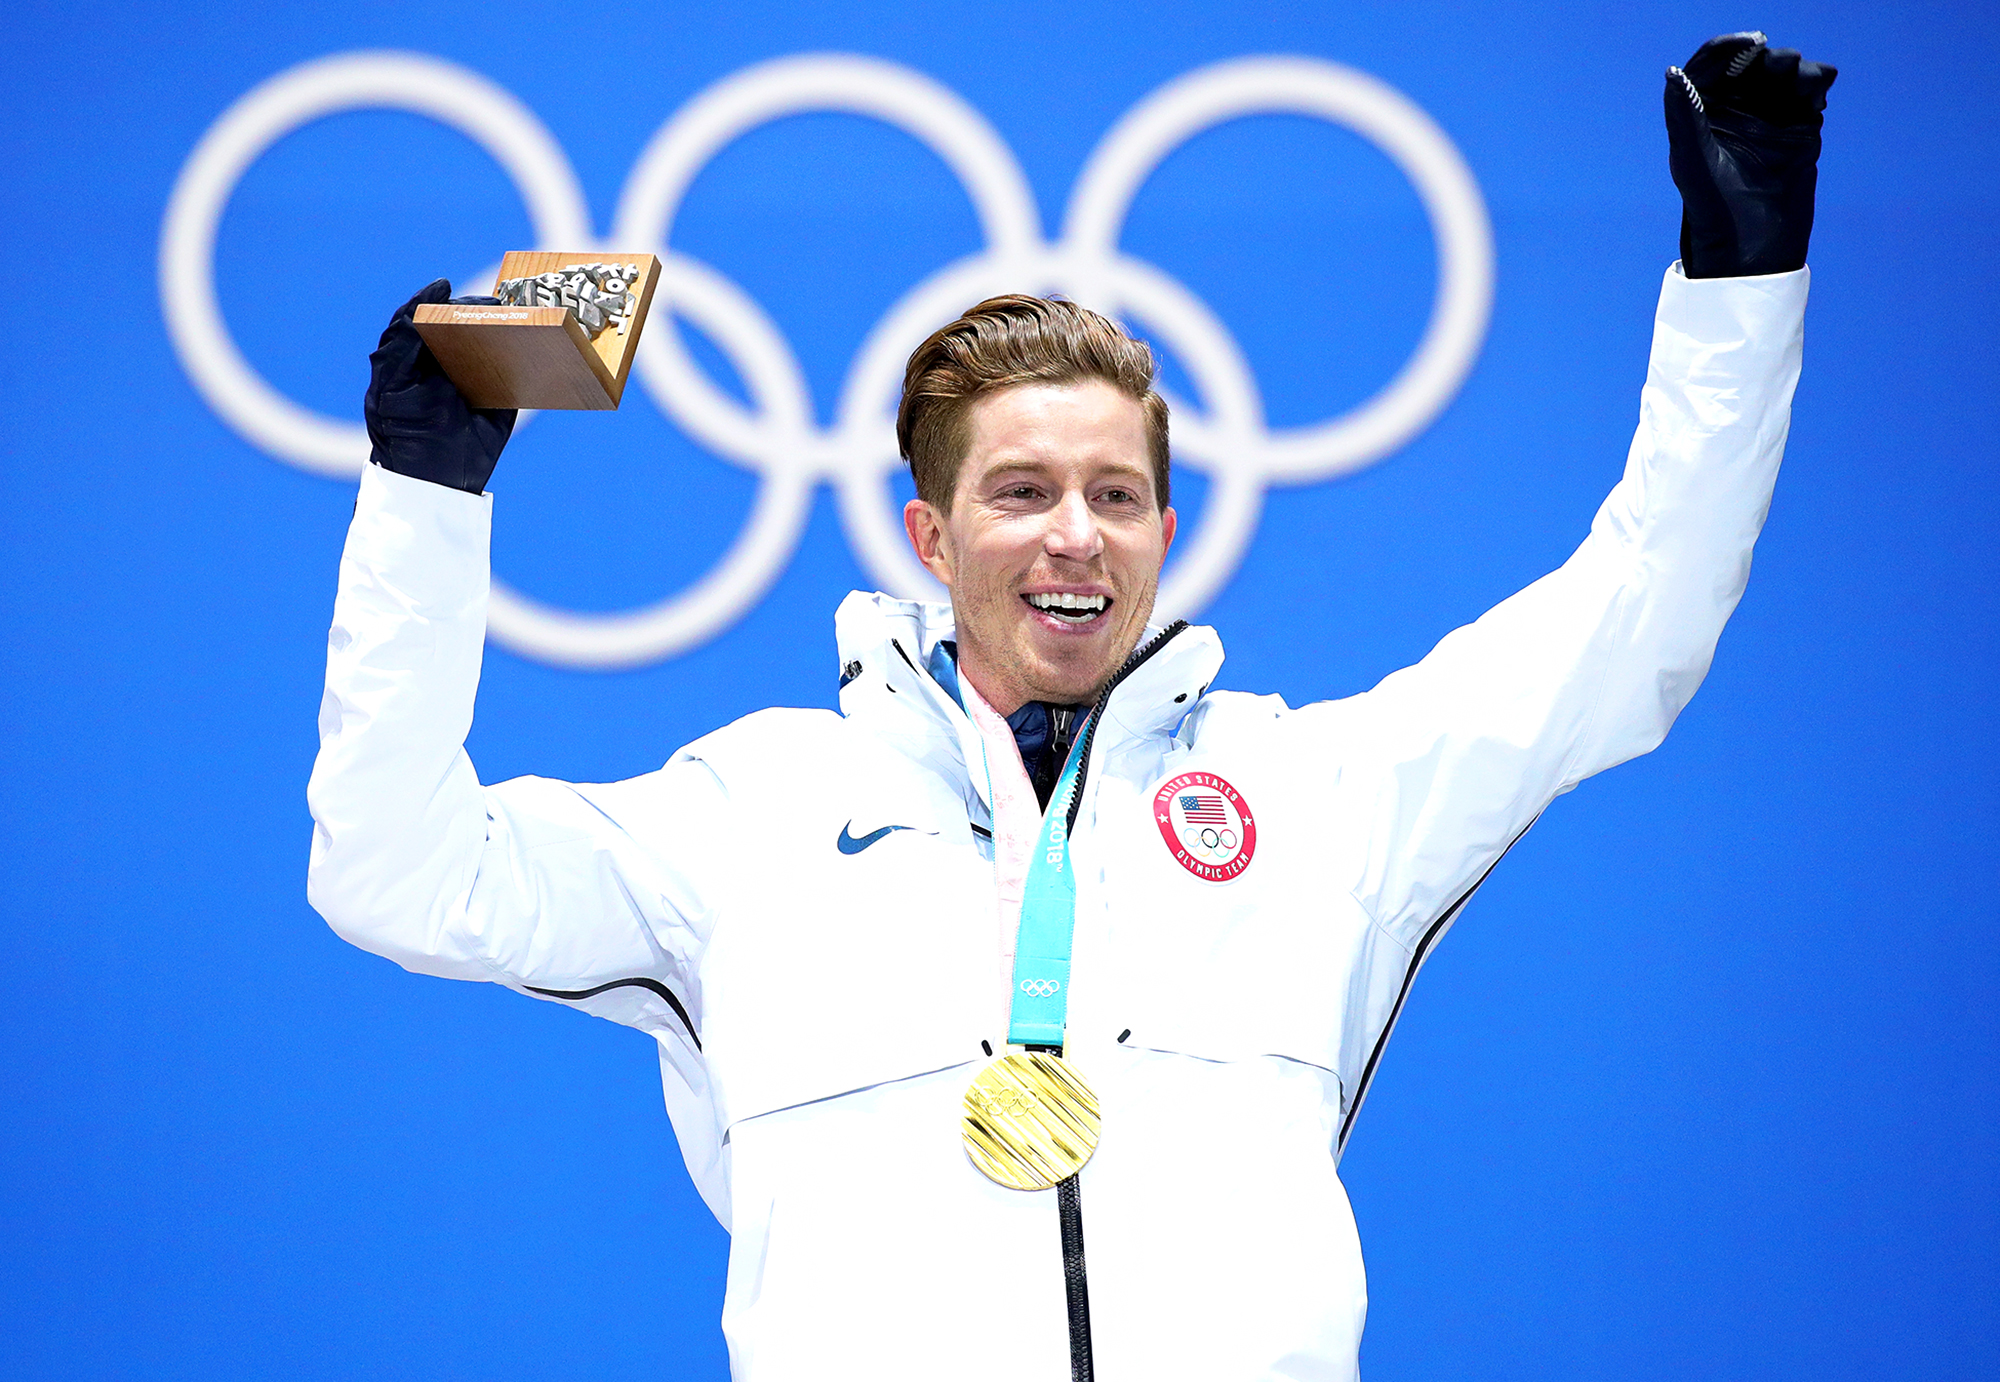 Snowboarder Shaun White wins men's halfpipe to give Team USA 100th